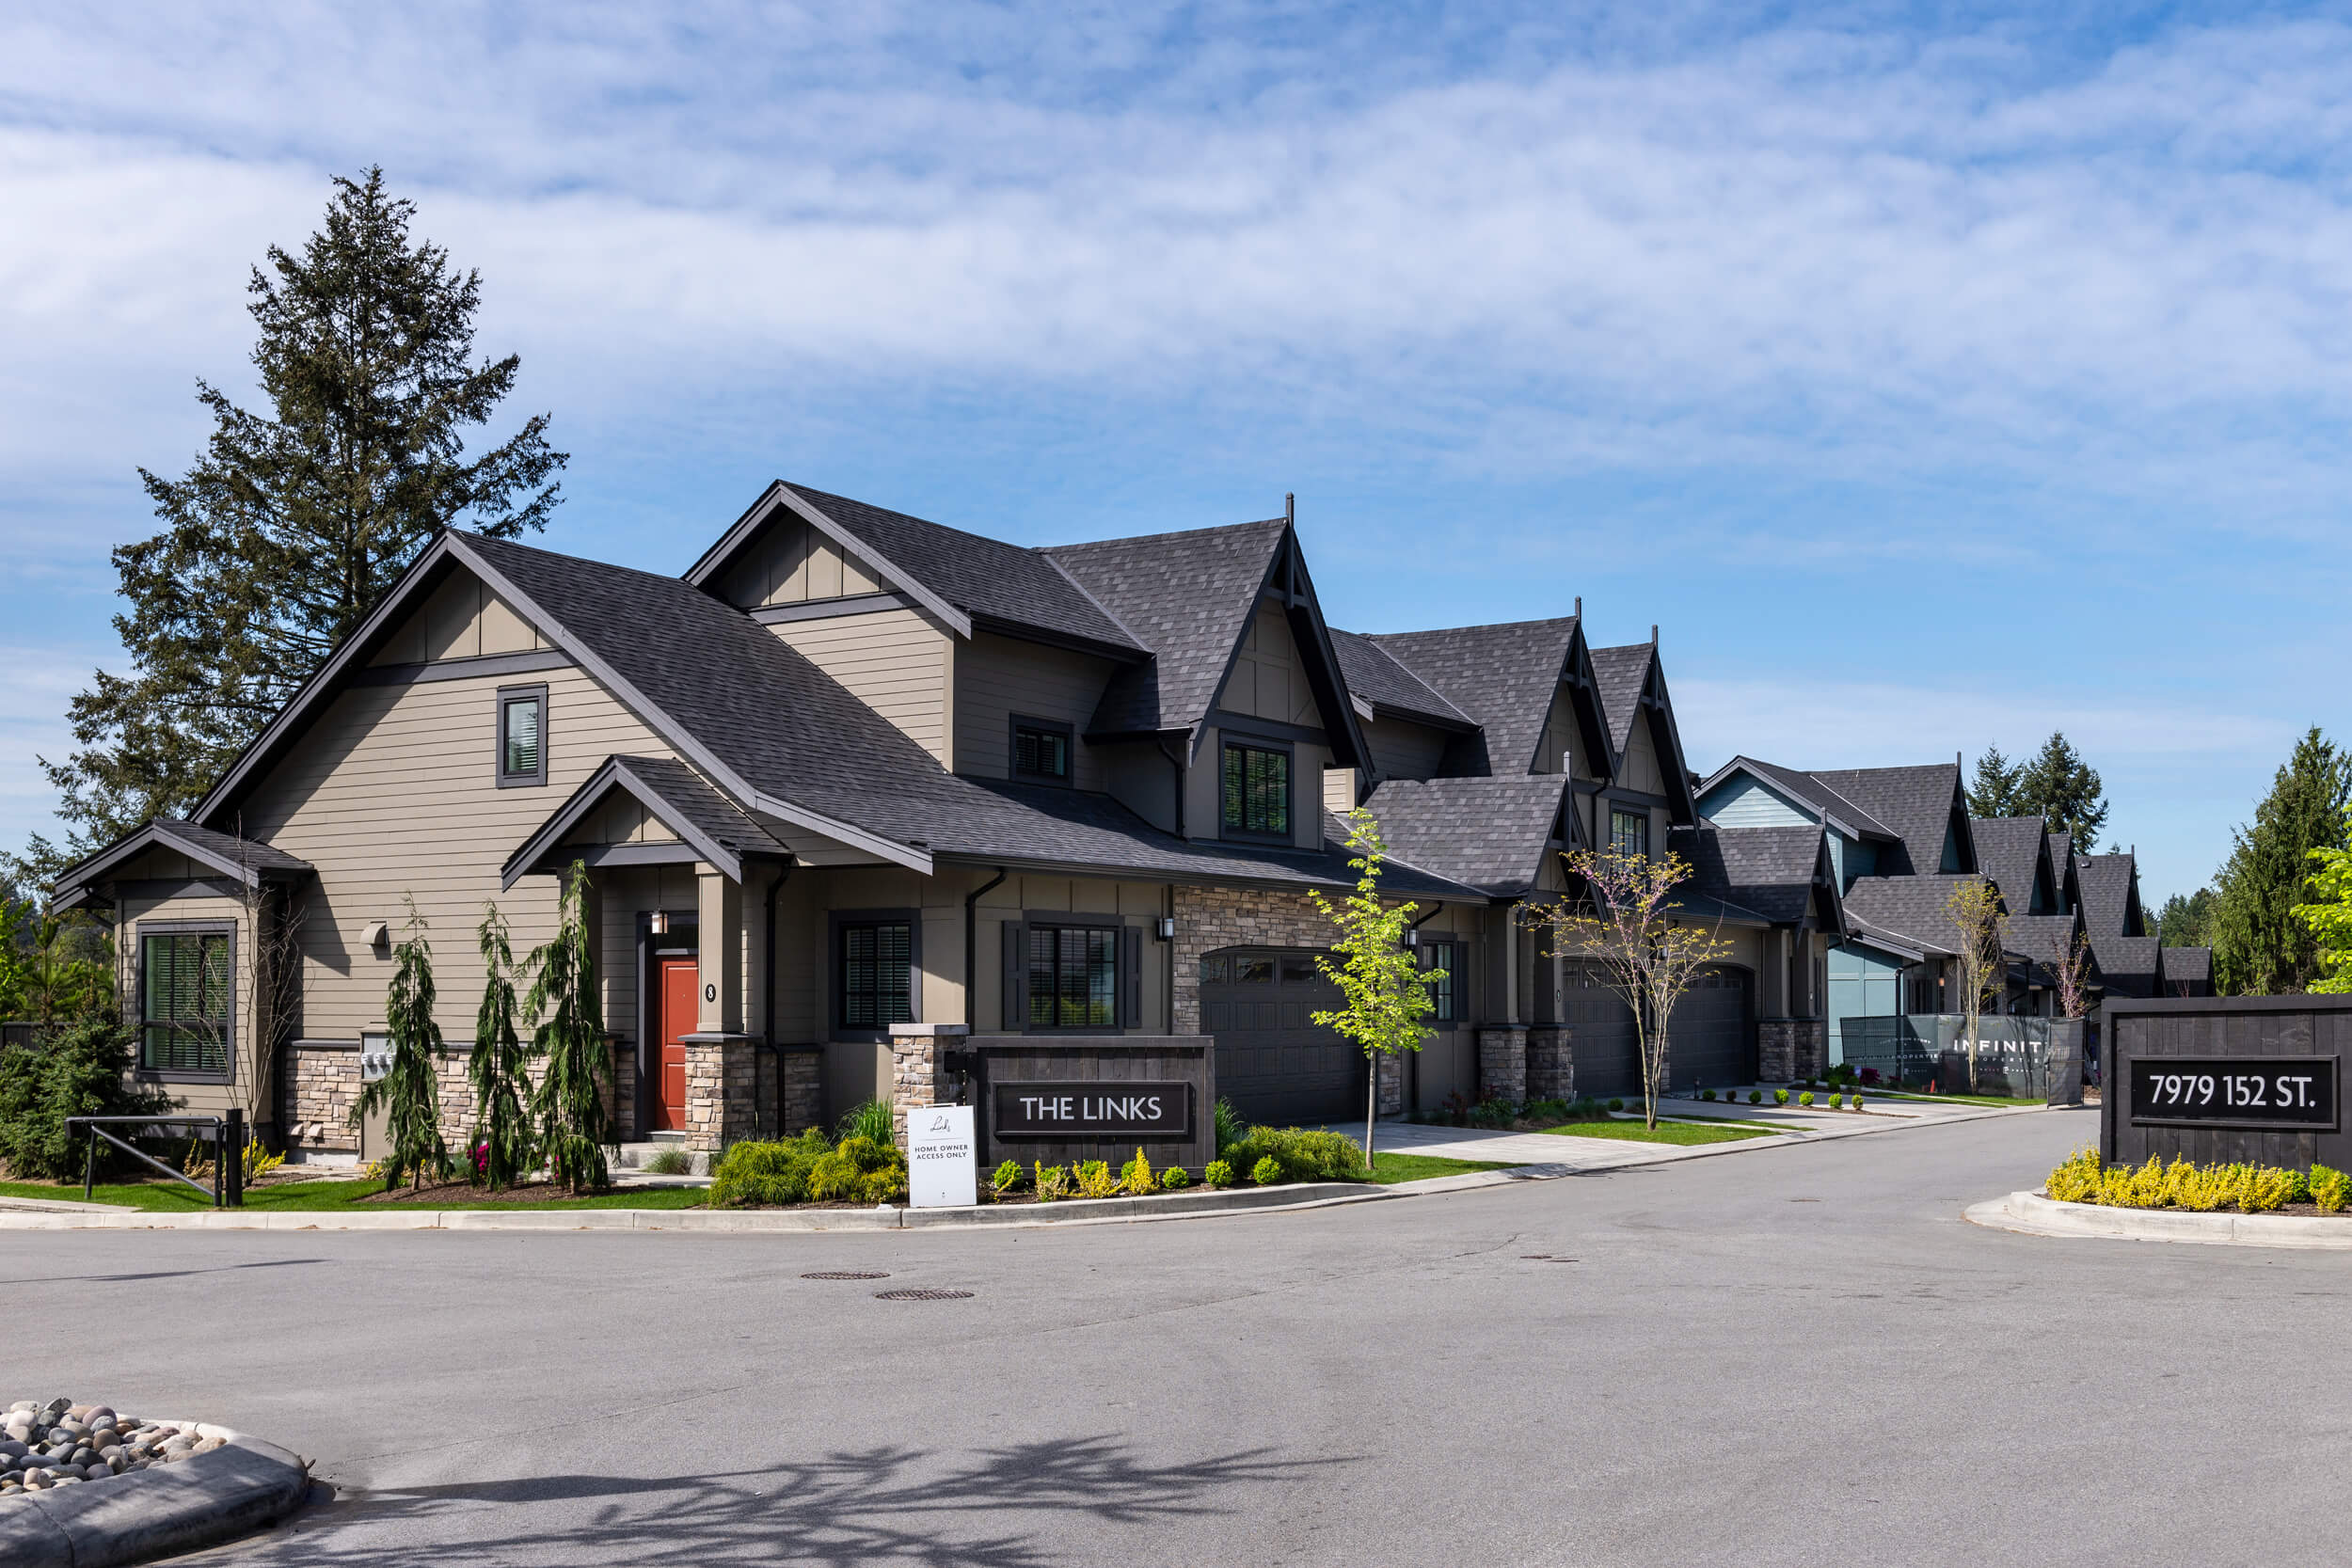 The “The Links” development is a residential townhouse project in Surrey; The Links Residences has 55 units. Design by Group 161 | Atelier Pacific Architecture.